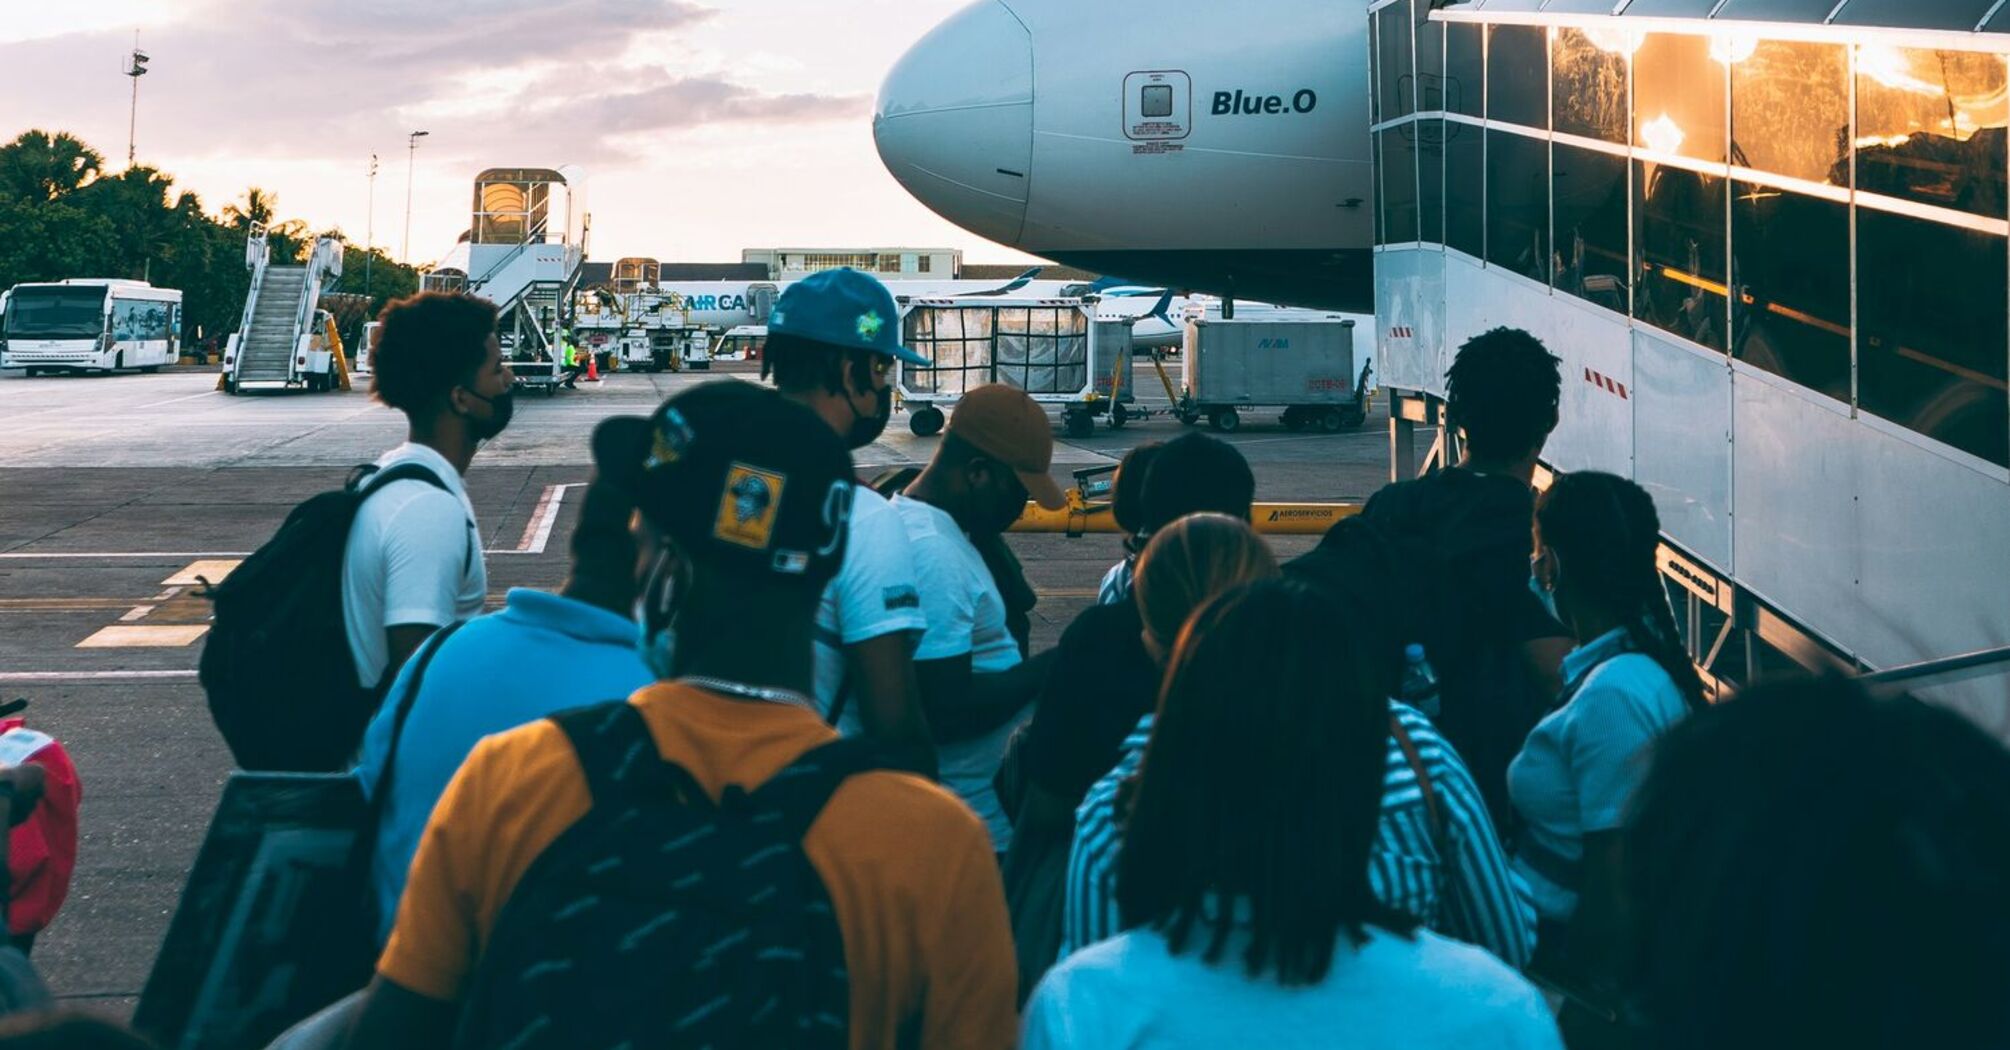 Passengers boarding an aircraft via a stairway on the tarmac during sunset